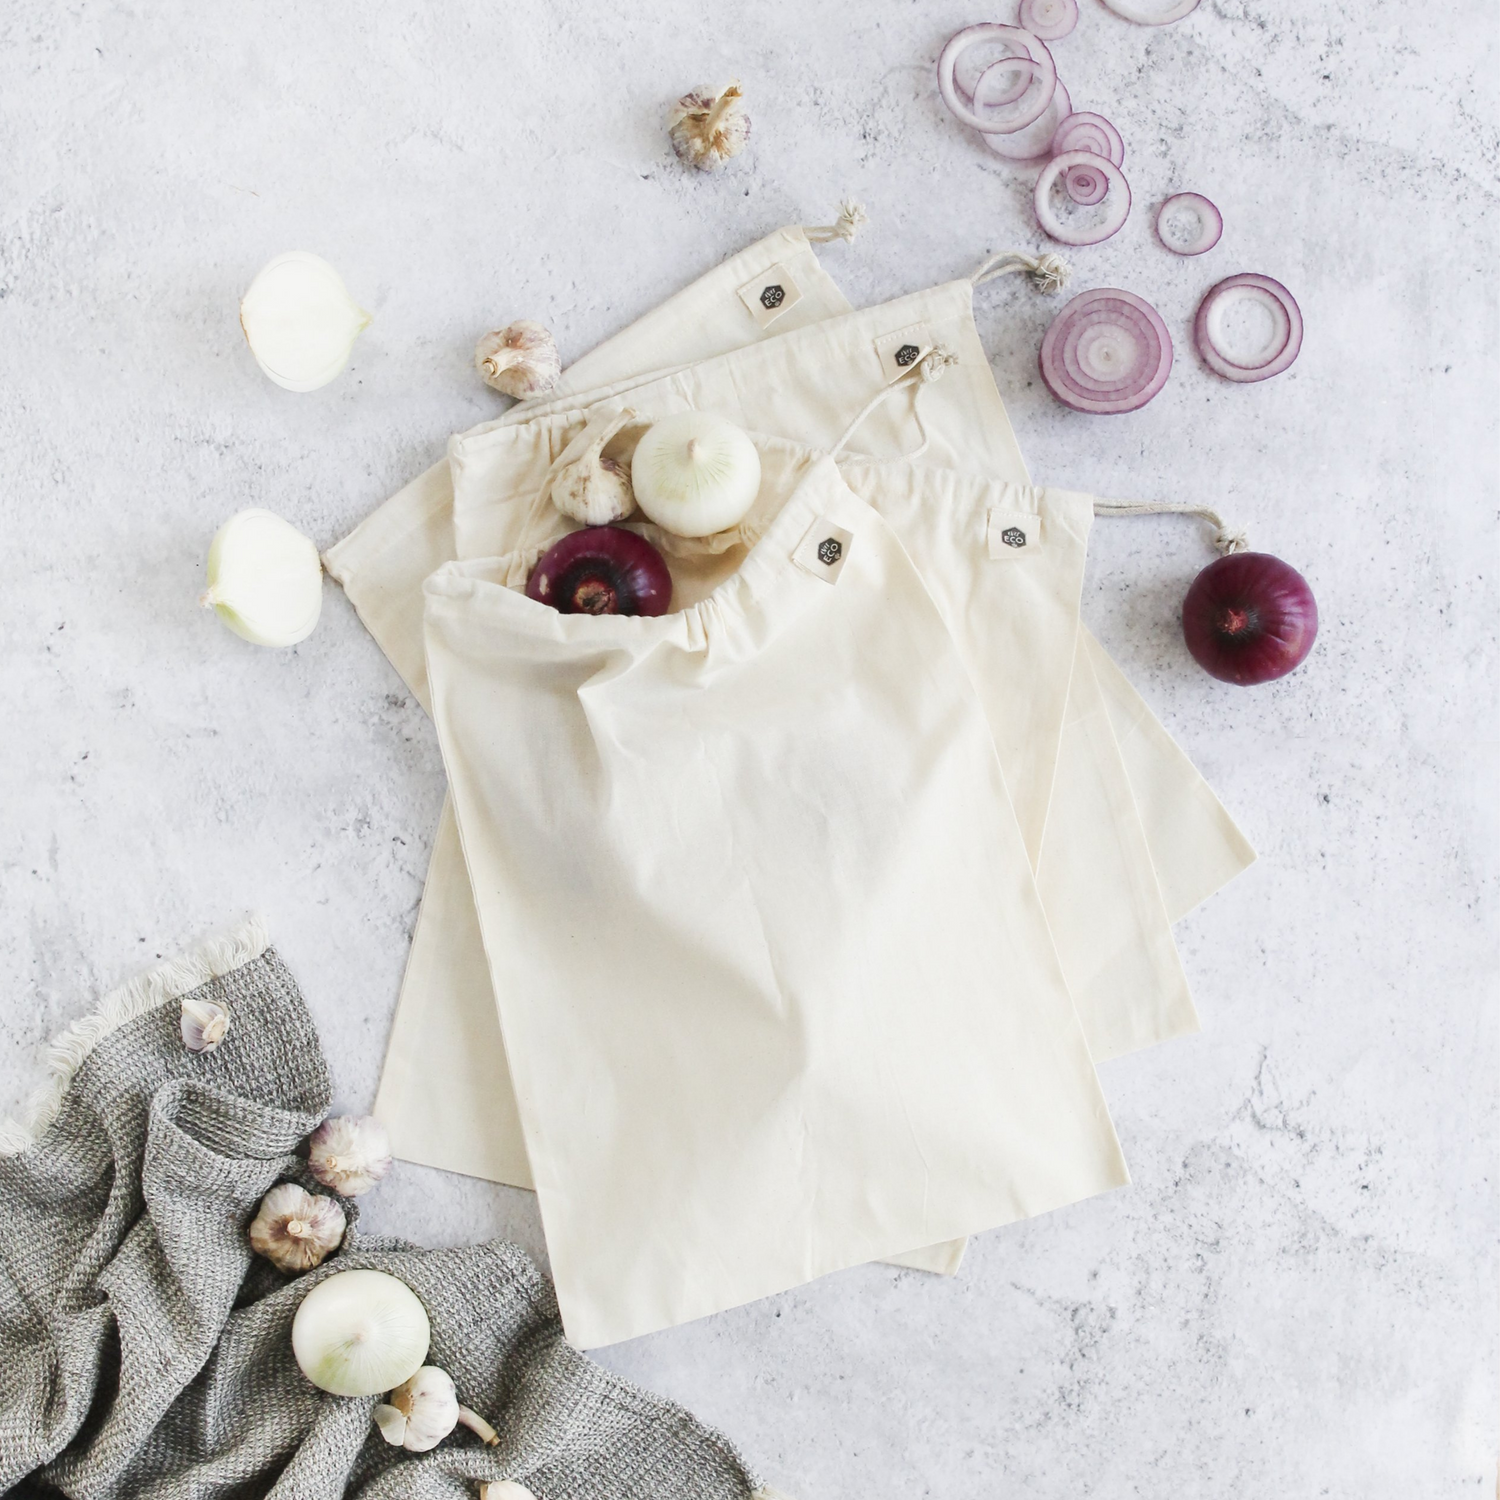 Ever Eco Organic Cotton Muslin Produce Bags - 4 Pack